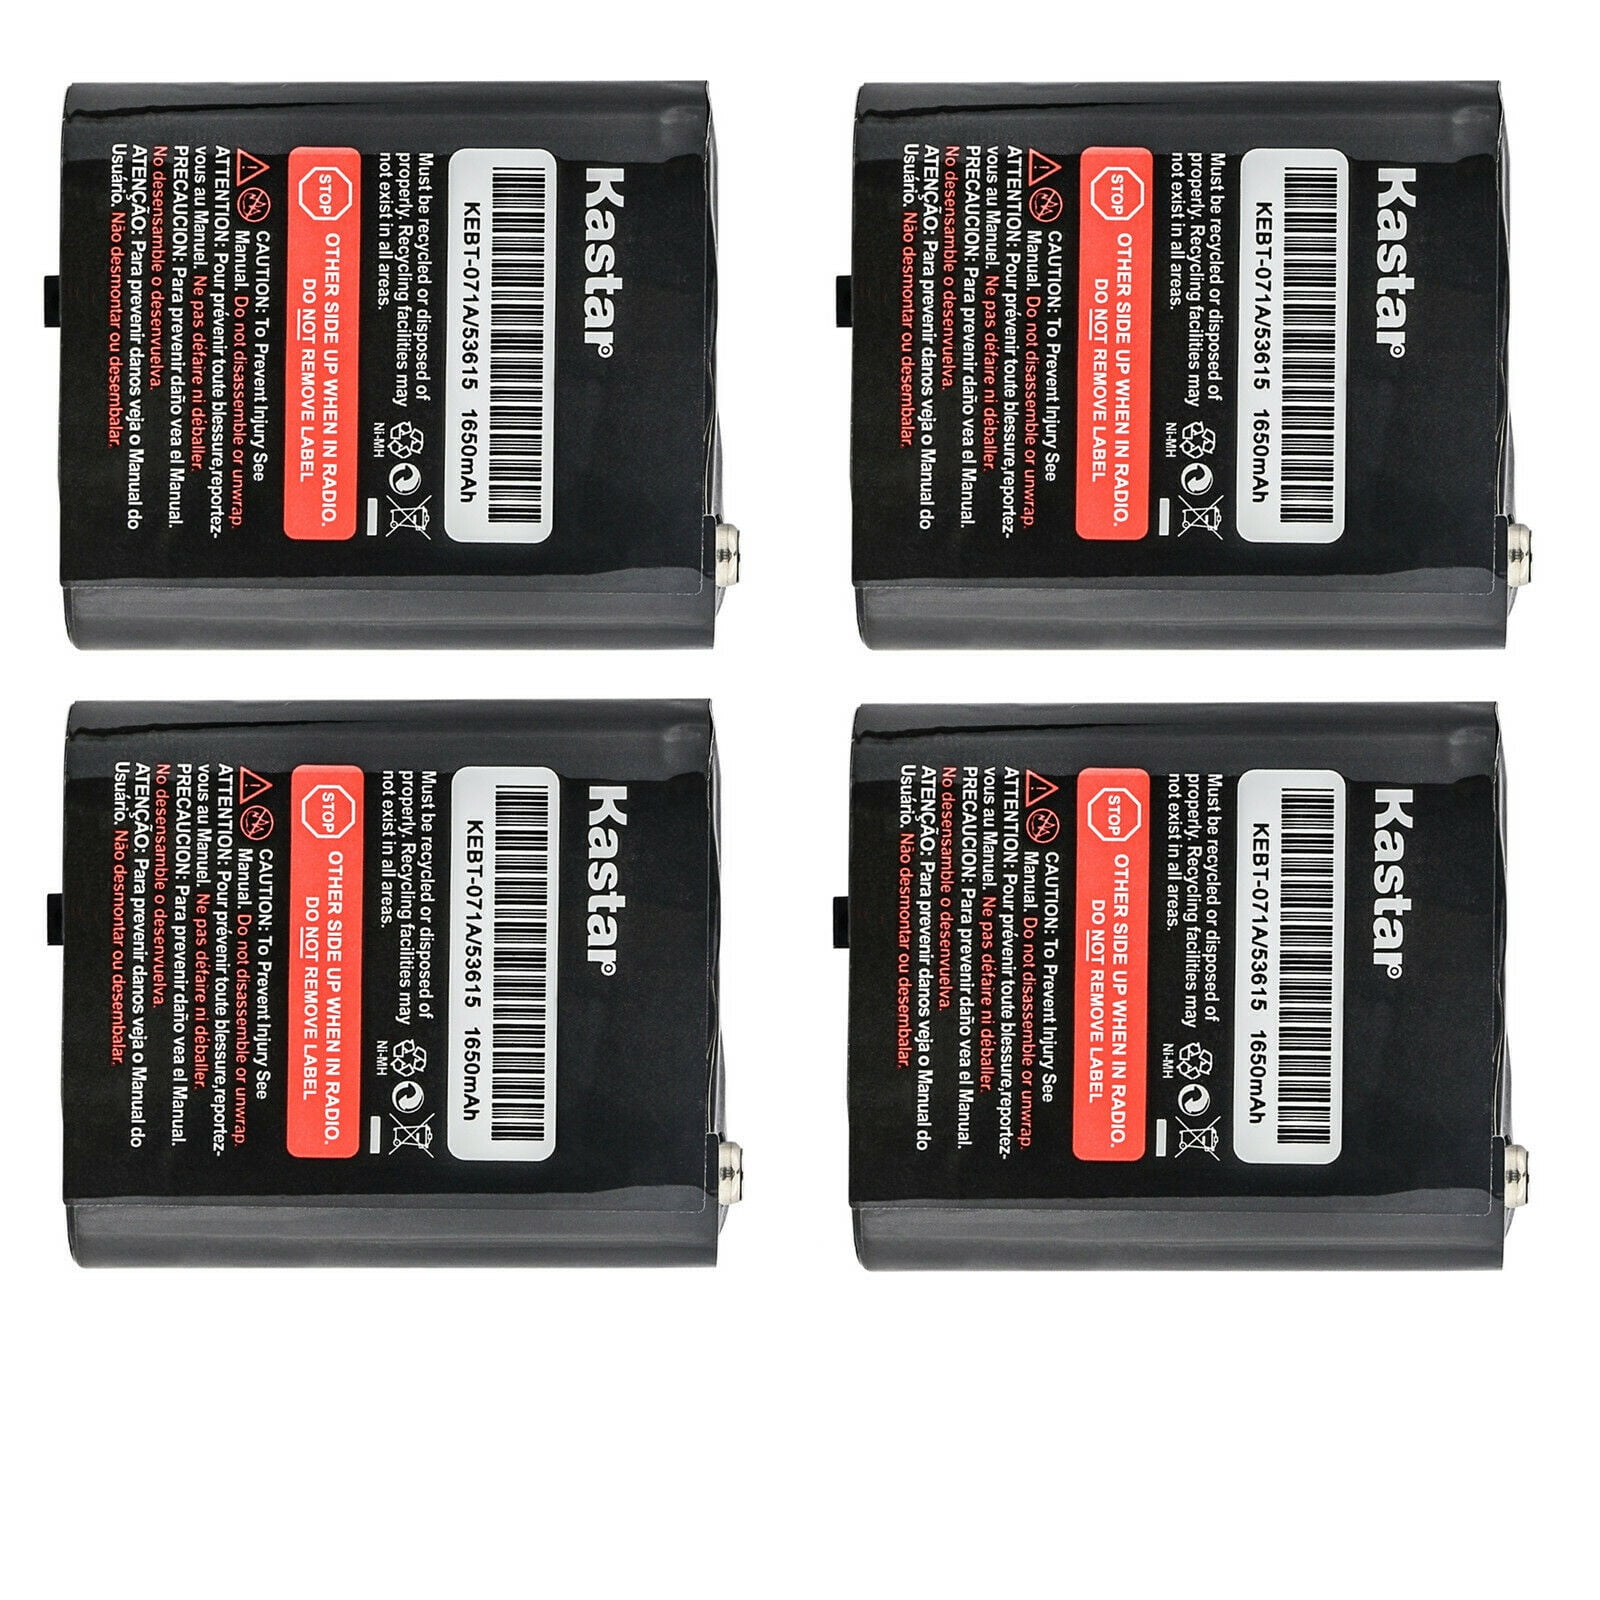 Kastar 3-Pack Ni-MH Battery 3.6V 1650mAh Replacement for Motorola Way  Radios TalkAbout Talkabout T200, Talkabout T260, Talkabout T265, Talkabout  T280, Talkabout T400, Talkabout T460